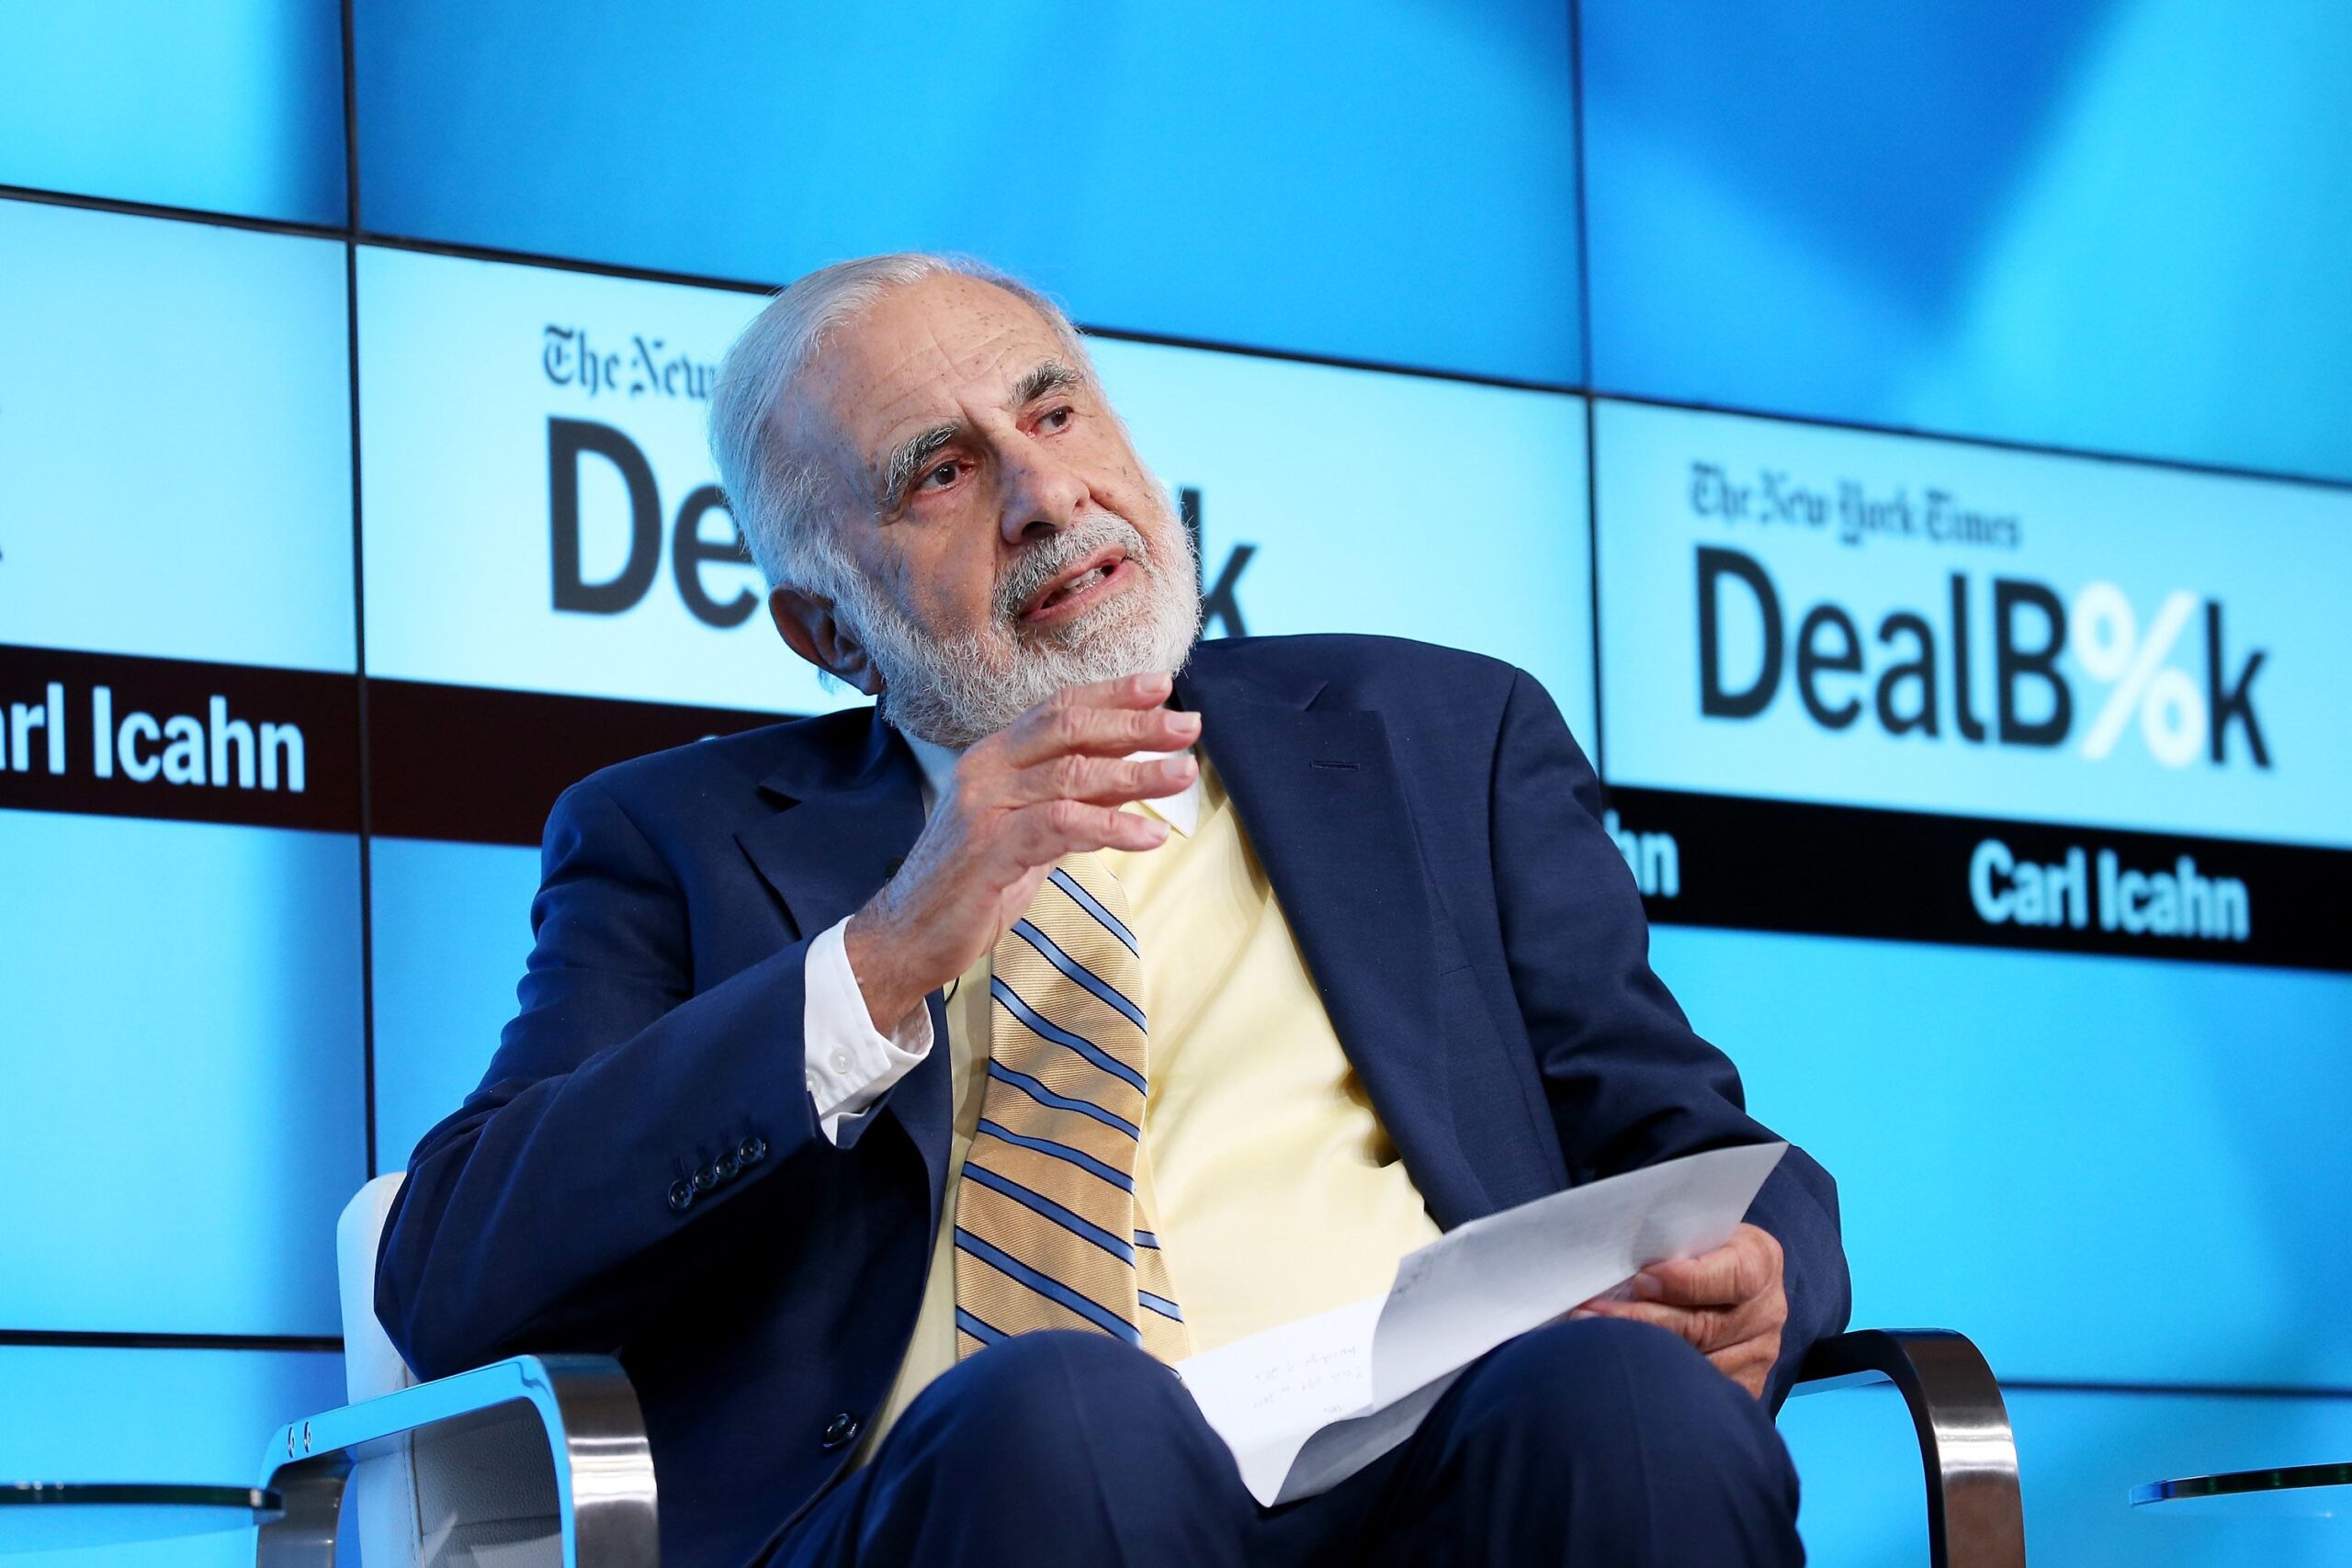 
What Does Carl Icahn Think About Venture Capital? The Billionaire's Surprising Opinion Revealed.